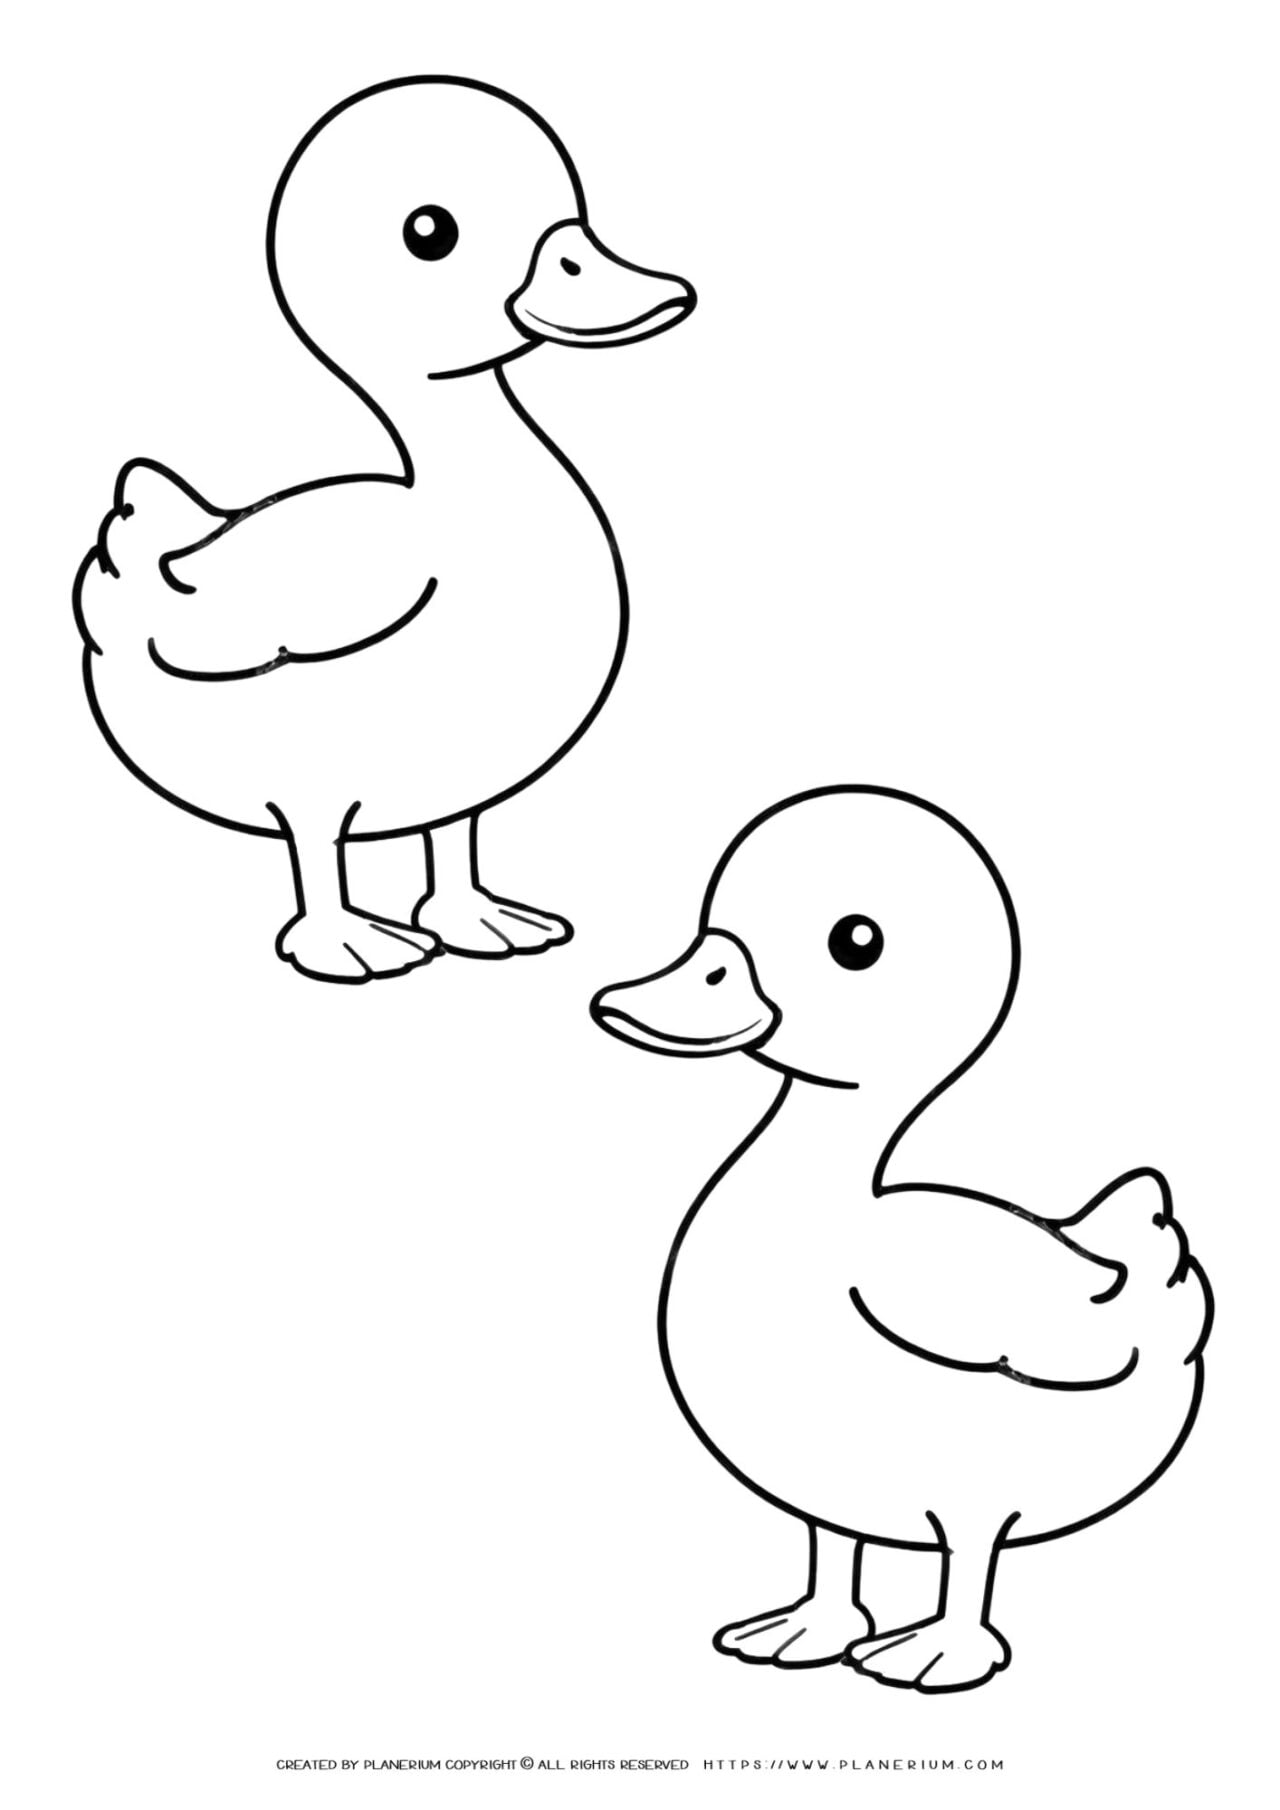 Line art of two ducks for coloring activity.